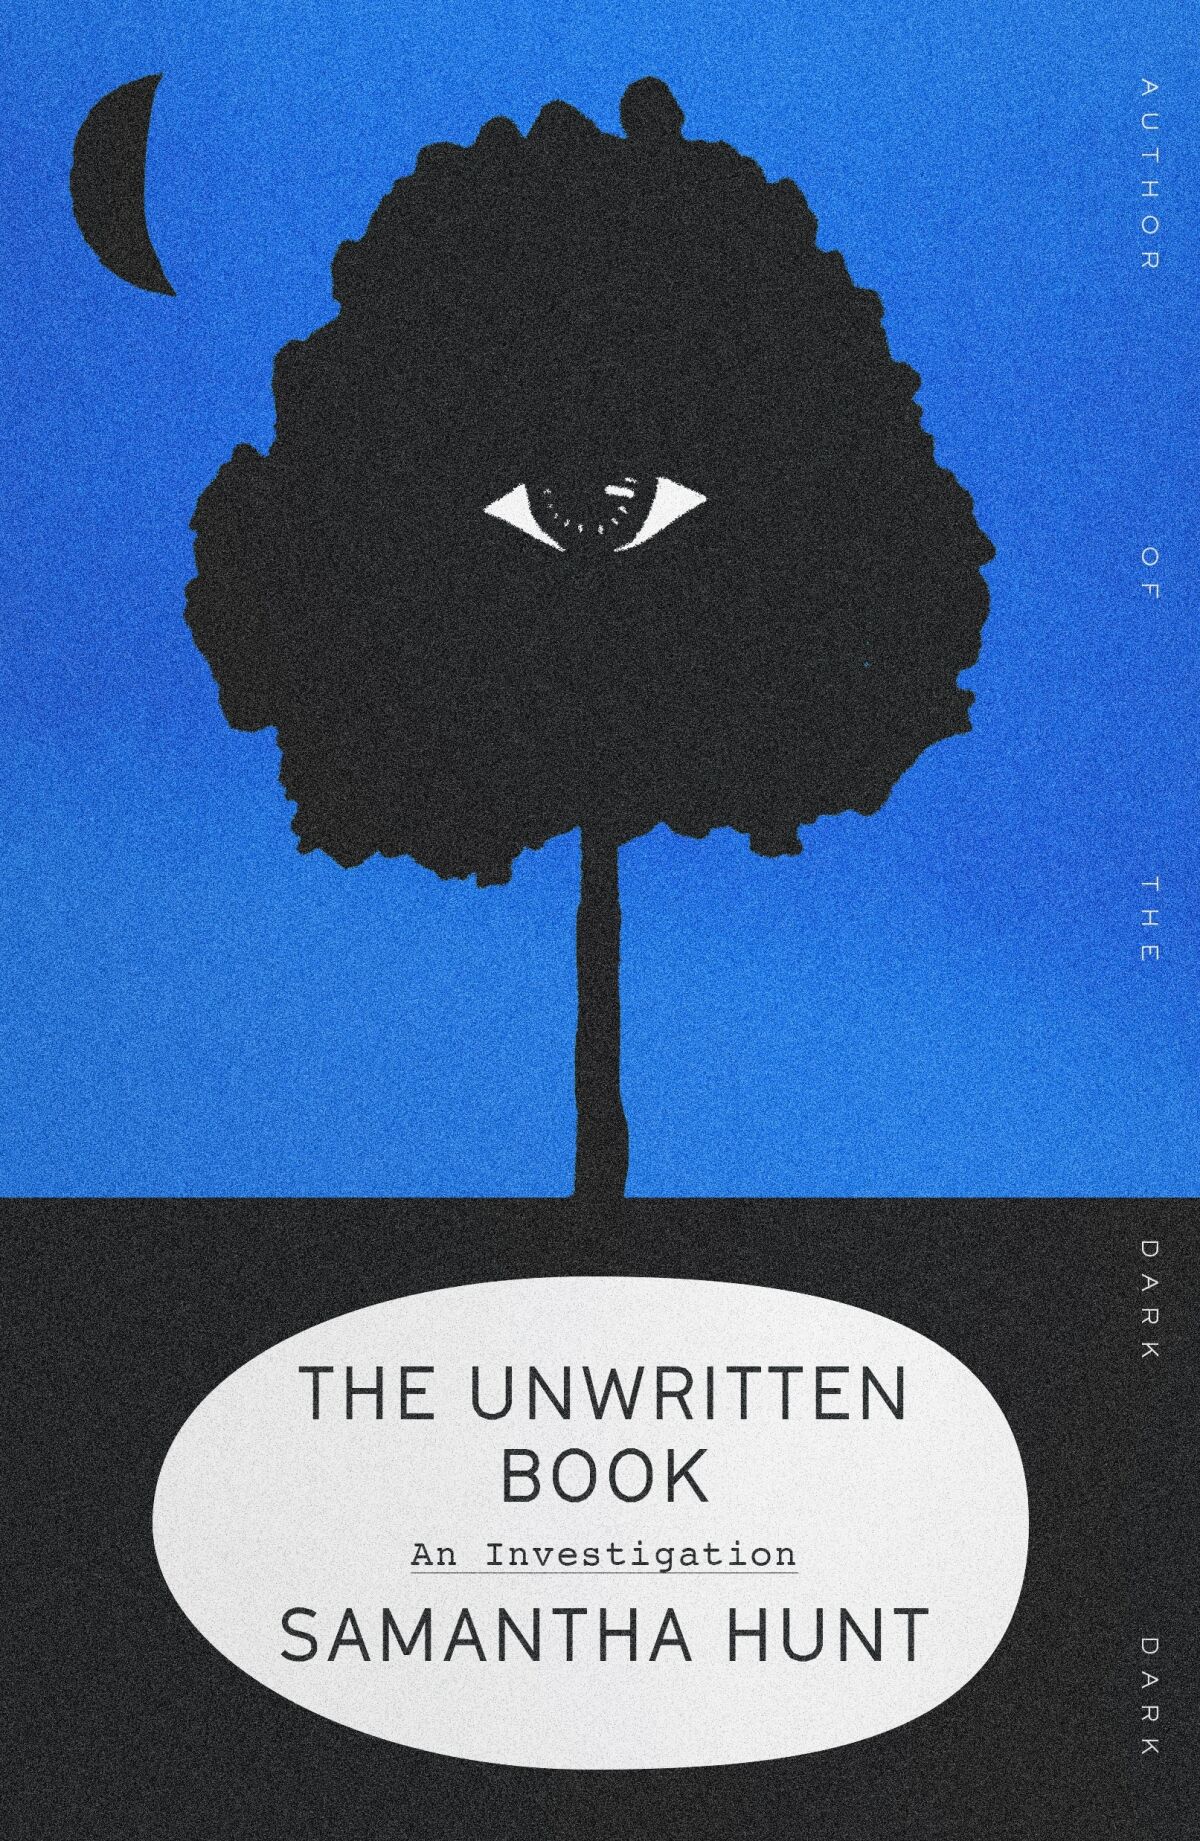 "The Unwritten Book: An Investigation," by Samantha Hunt